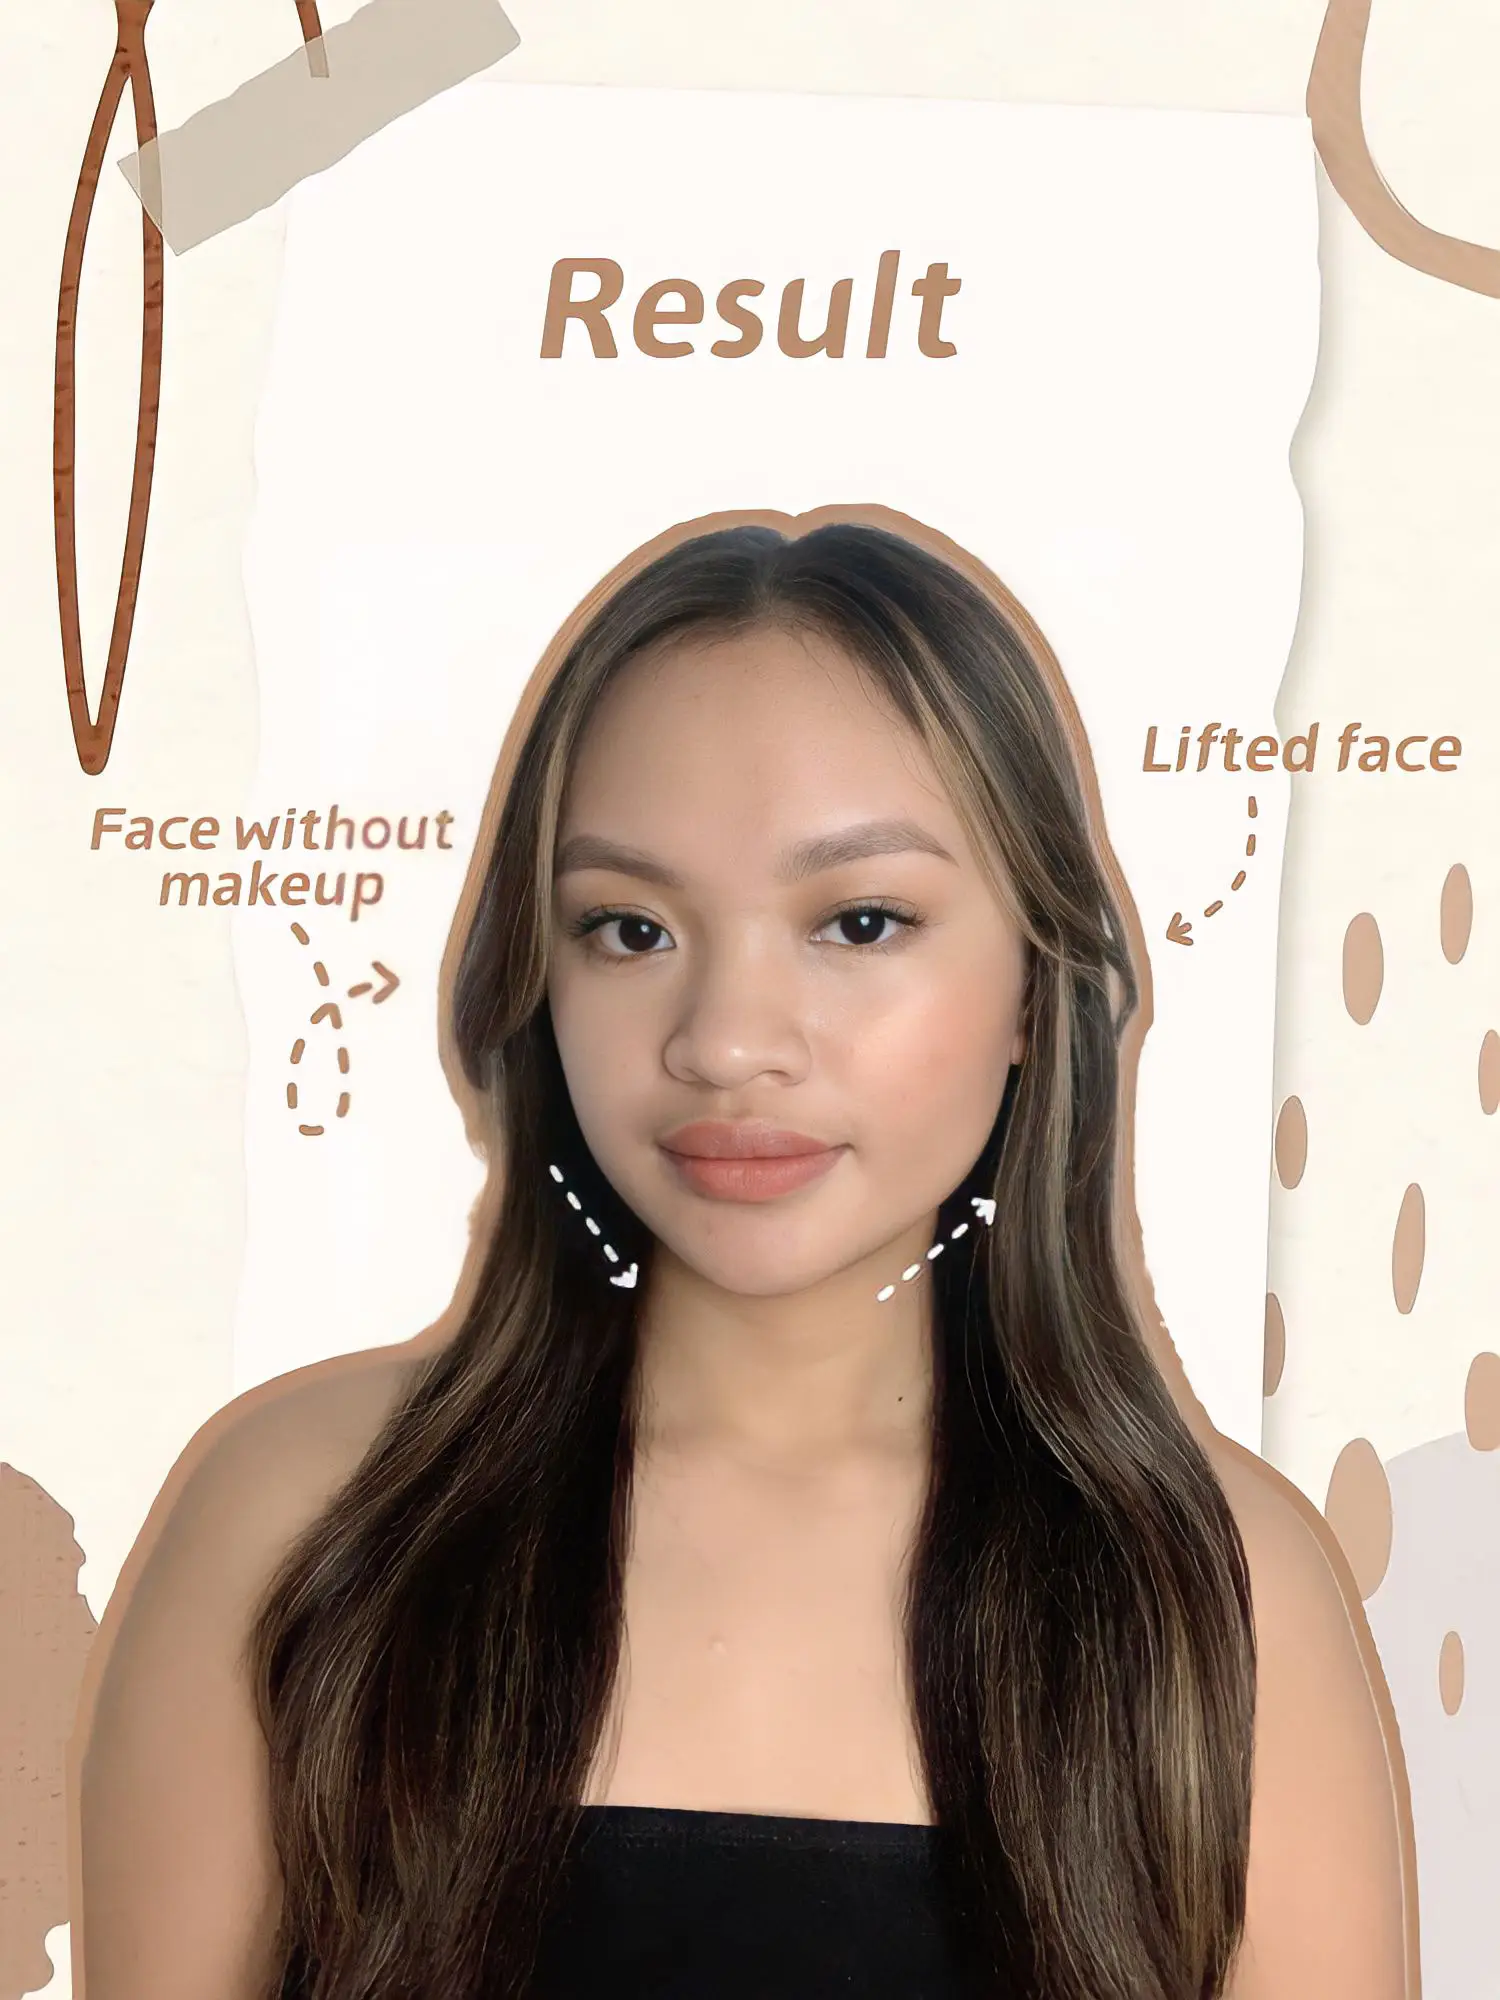 Fake a Facelift in 5 Minutes with this Contour Technique